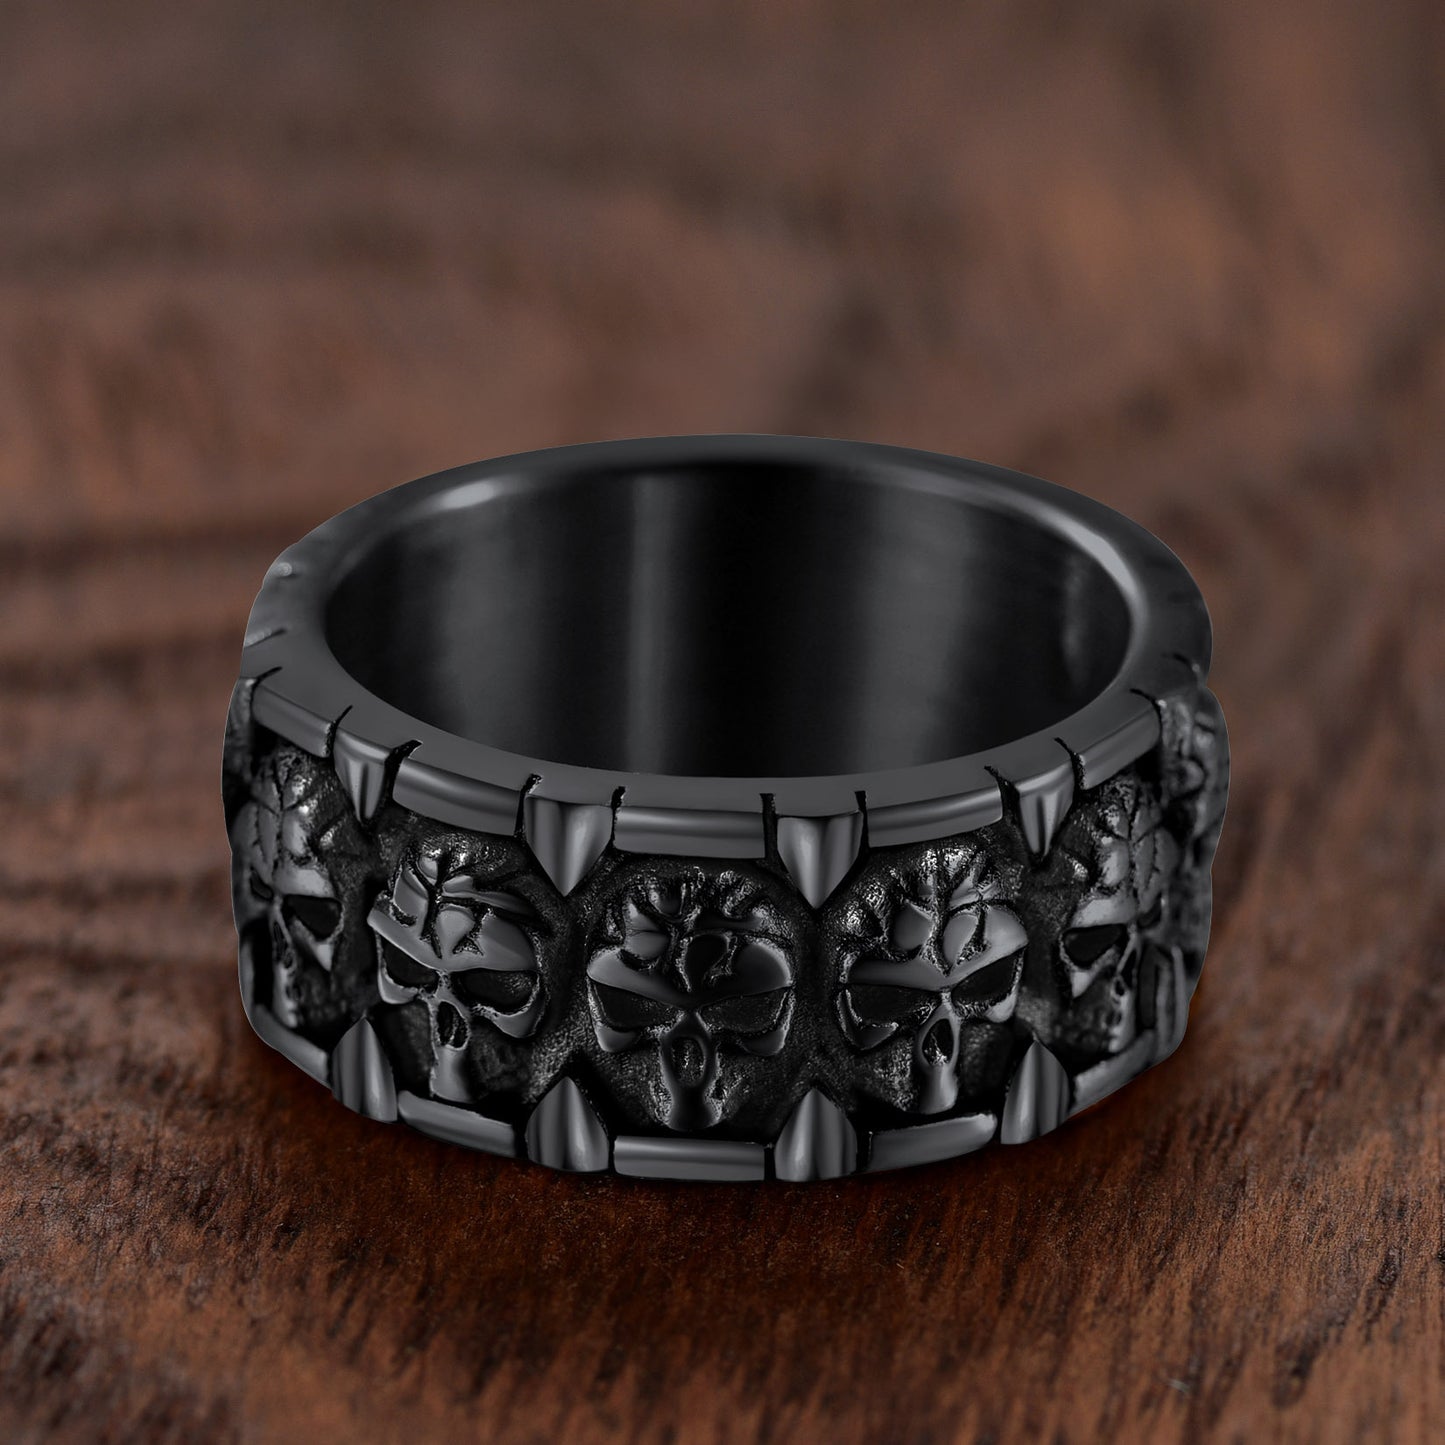 ChainsPro Skull Jewelry for Men Stainless Steel Ring Size 7 Viking Bikers Rings